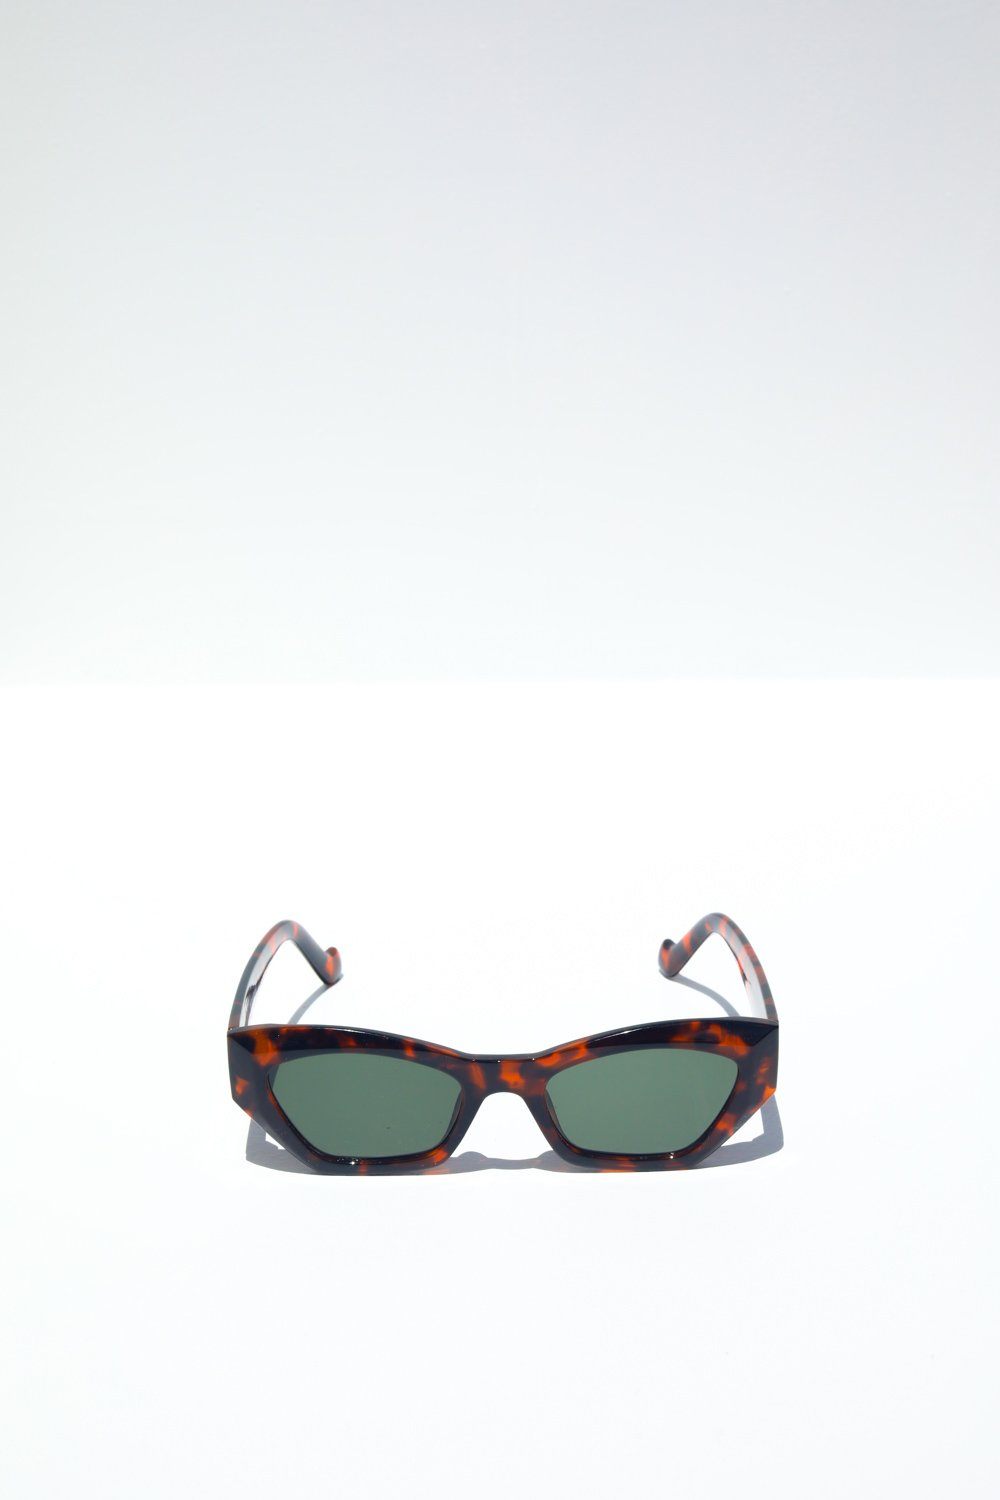 Breezy Chunky Frames Sunglasses Mulberry & Grand Tortoise with Green Lens 